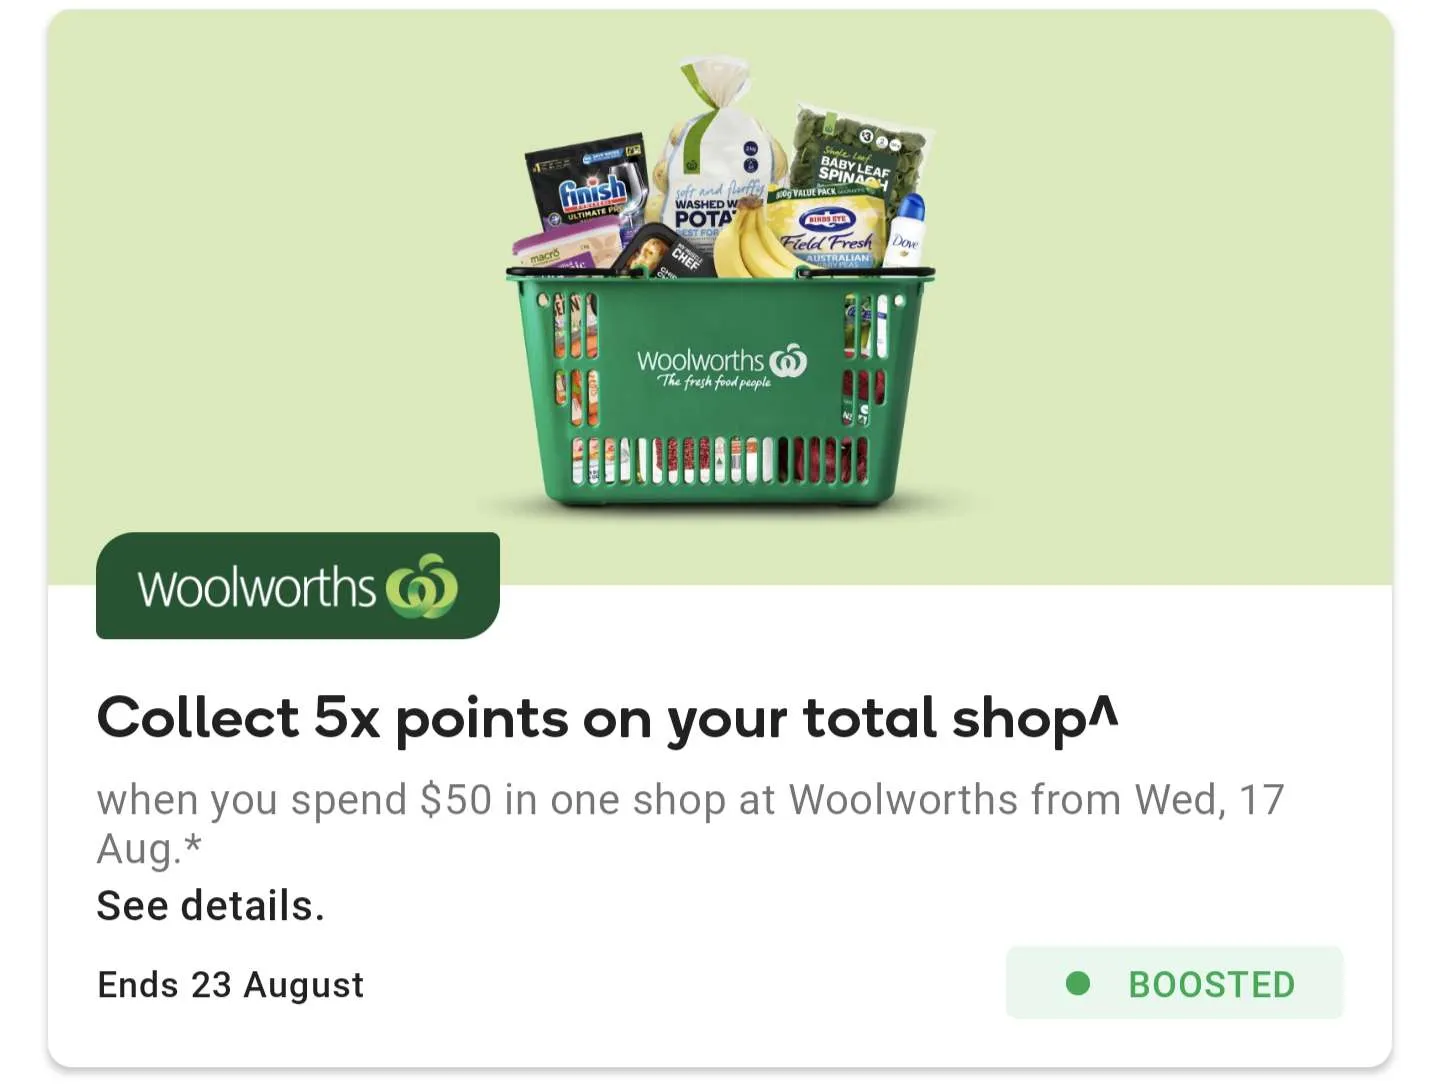 Woolworths5Boost Supplied 1440x1090 